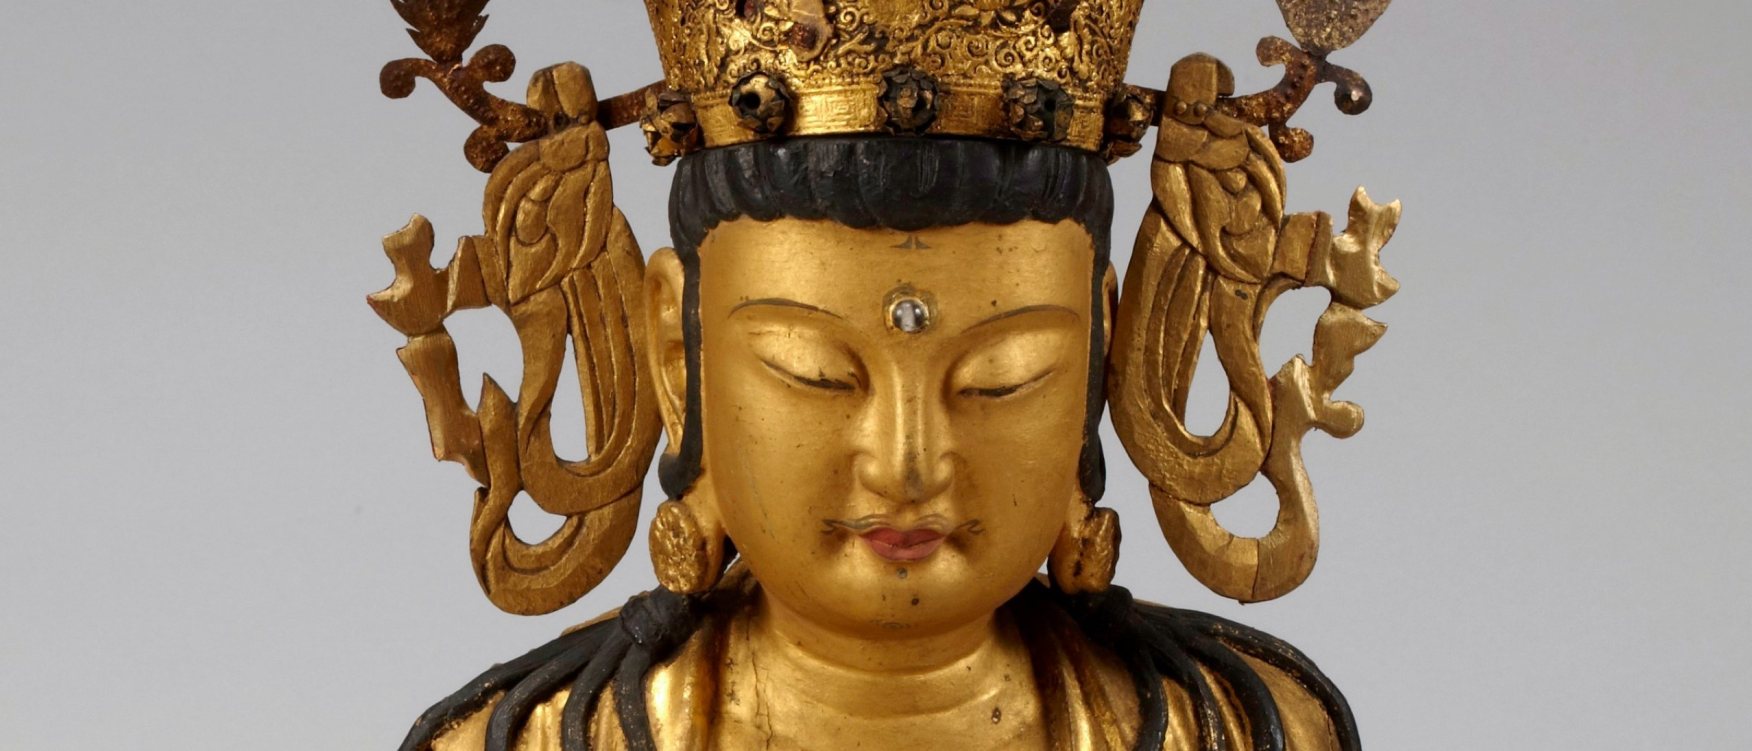 Institution Smithsonian Sculpture Freer|Sackler Eye to When There More Comes It the Is Reveals | Smithsonian\'s Buddhist Meets Than